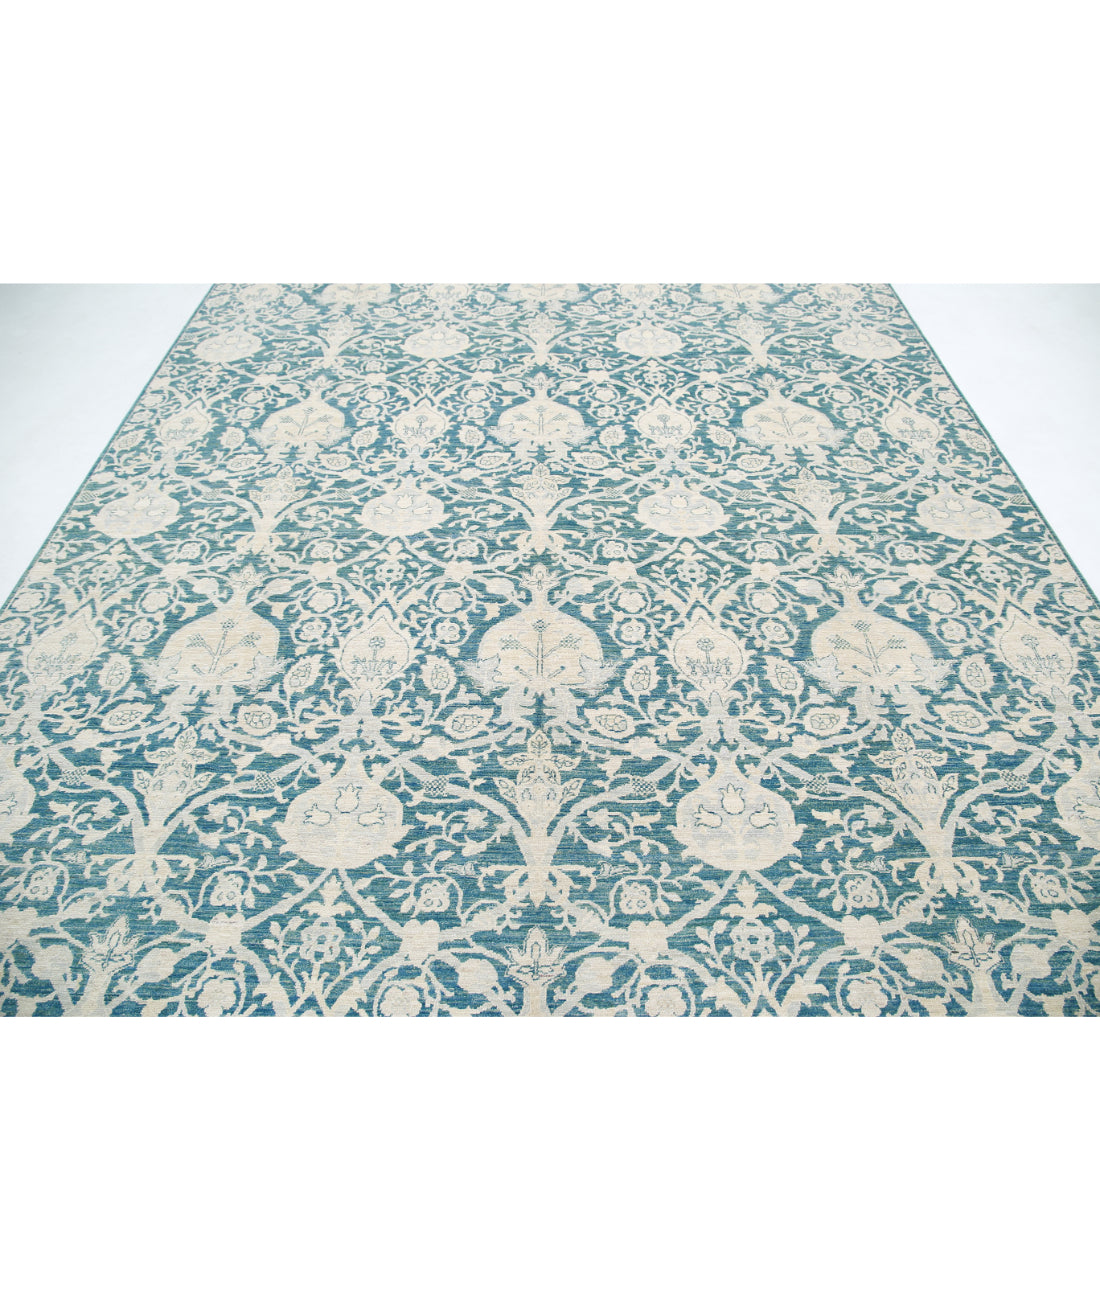 Hand Knotted Serenity Artemix Wool Rug - 8'10'' x 11'11'' 8'10'' x 11'11'' (265 X 358) / Green / Ivory